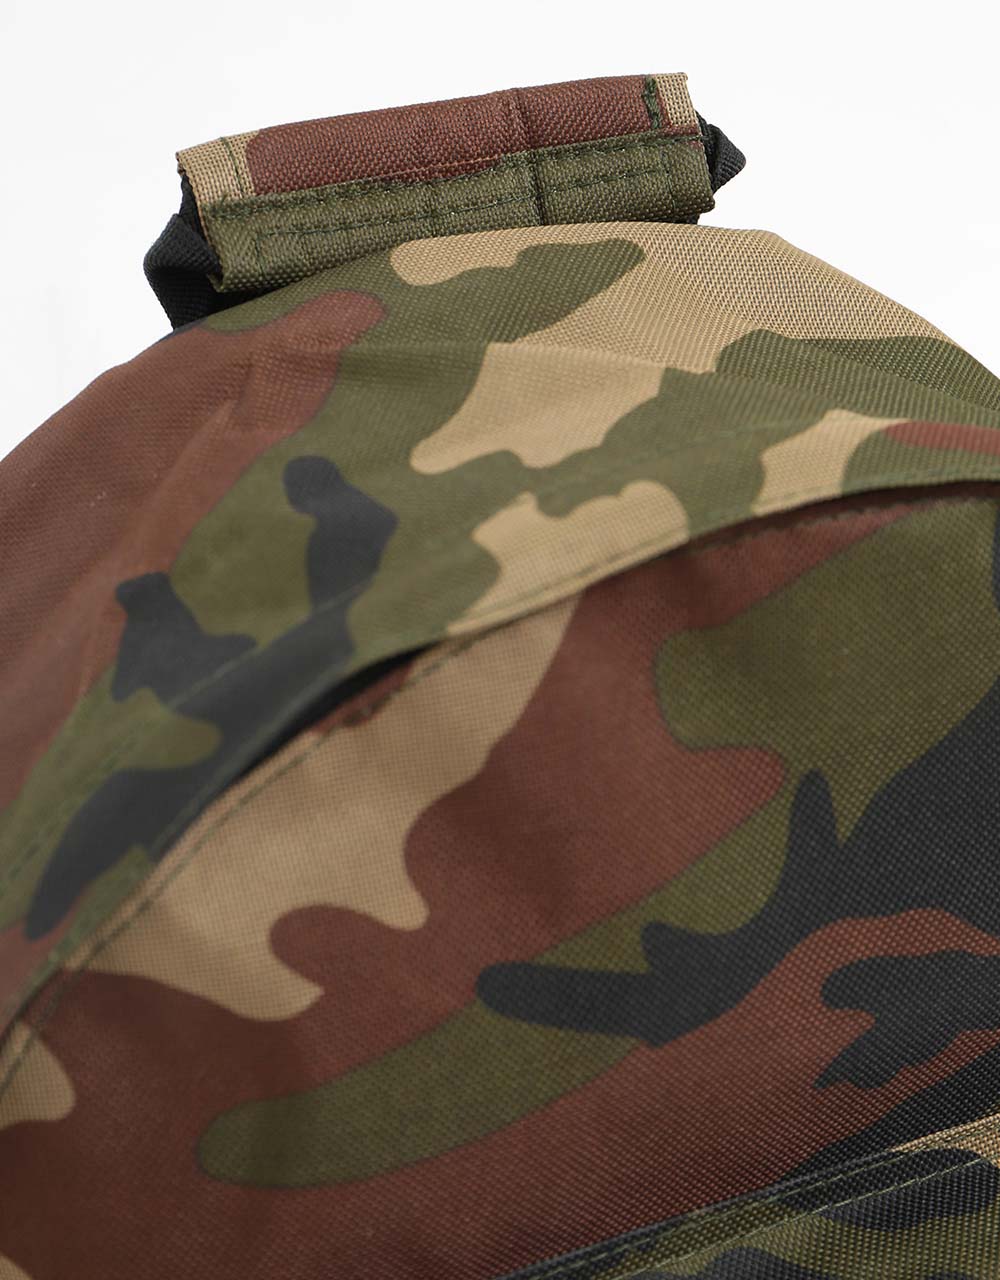 Route One Backpack - Camo